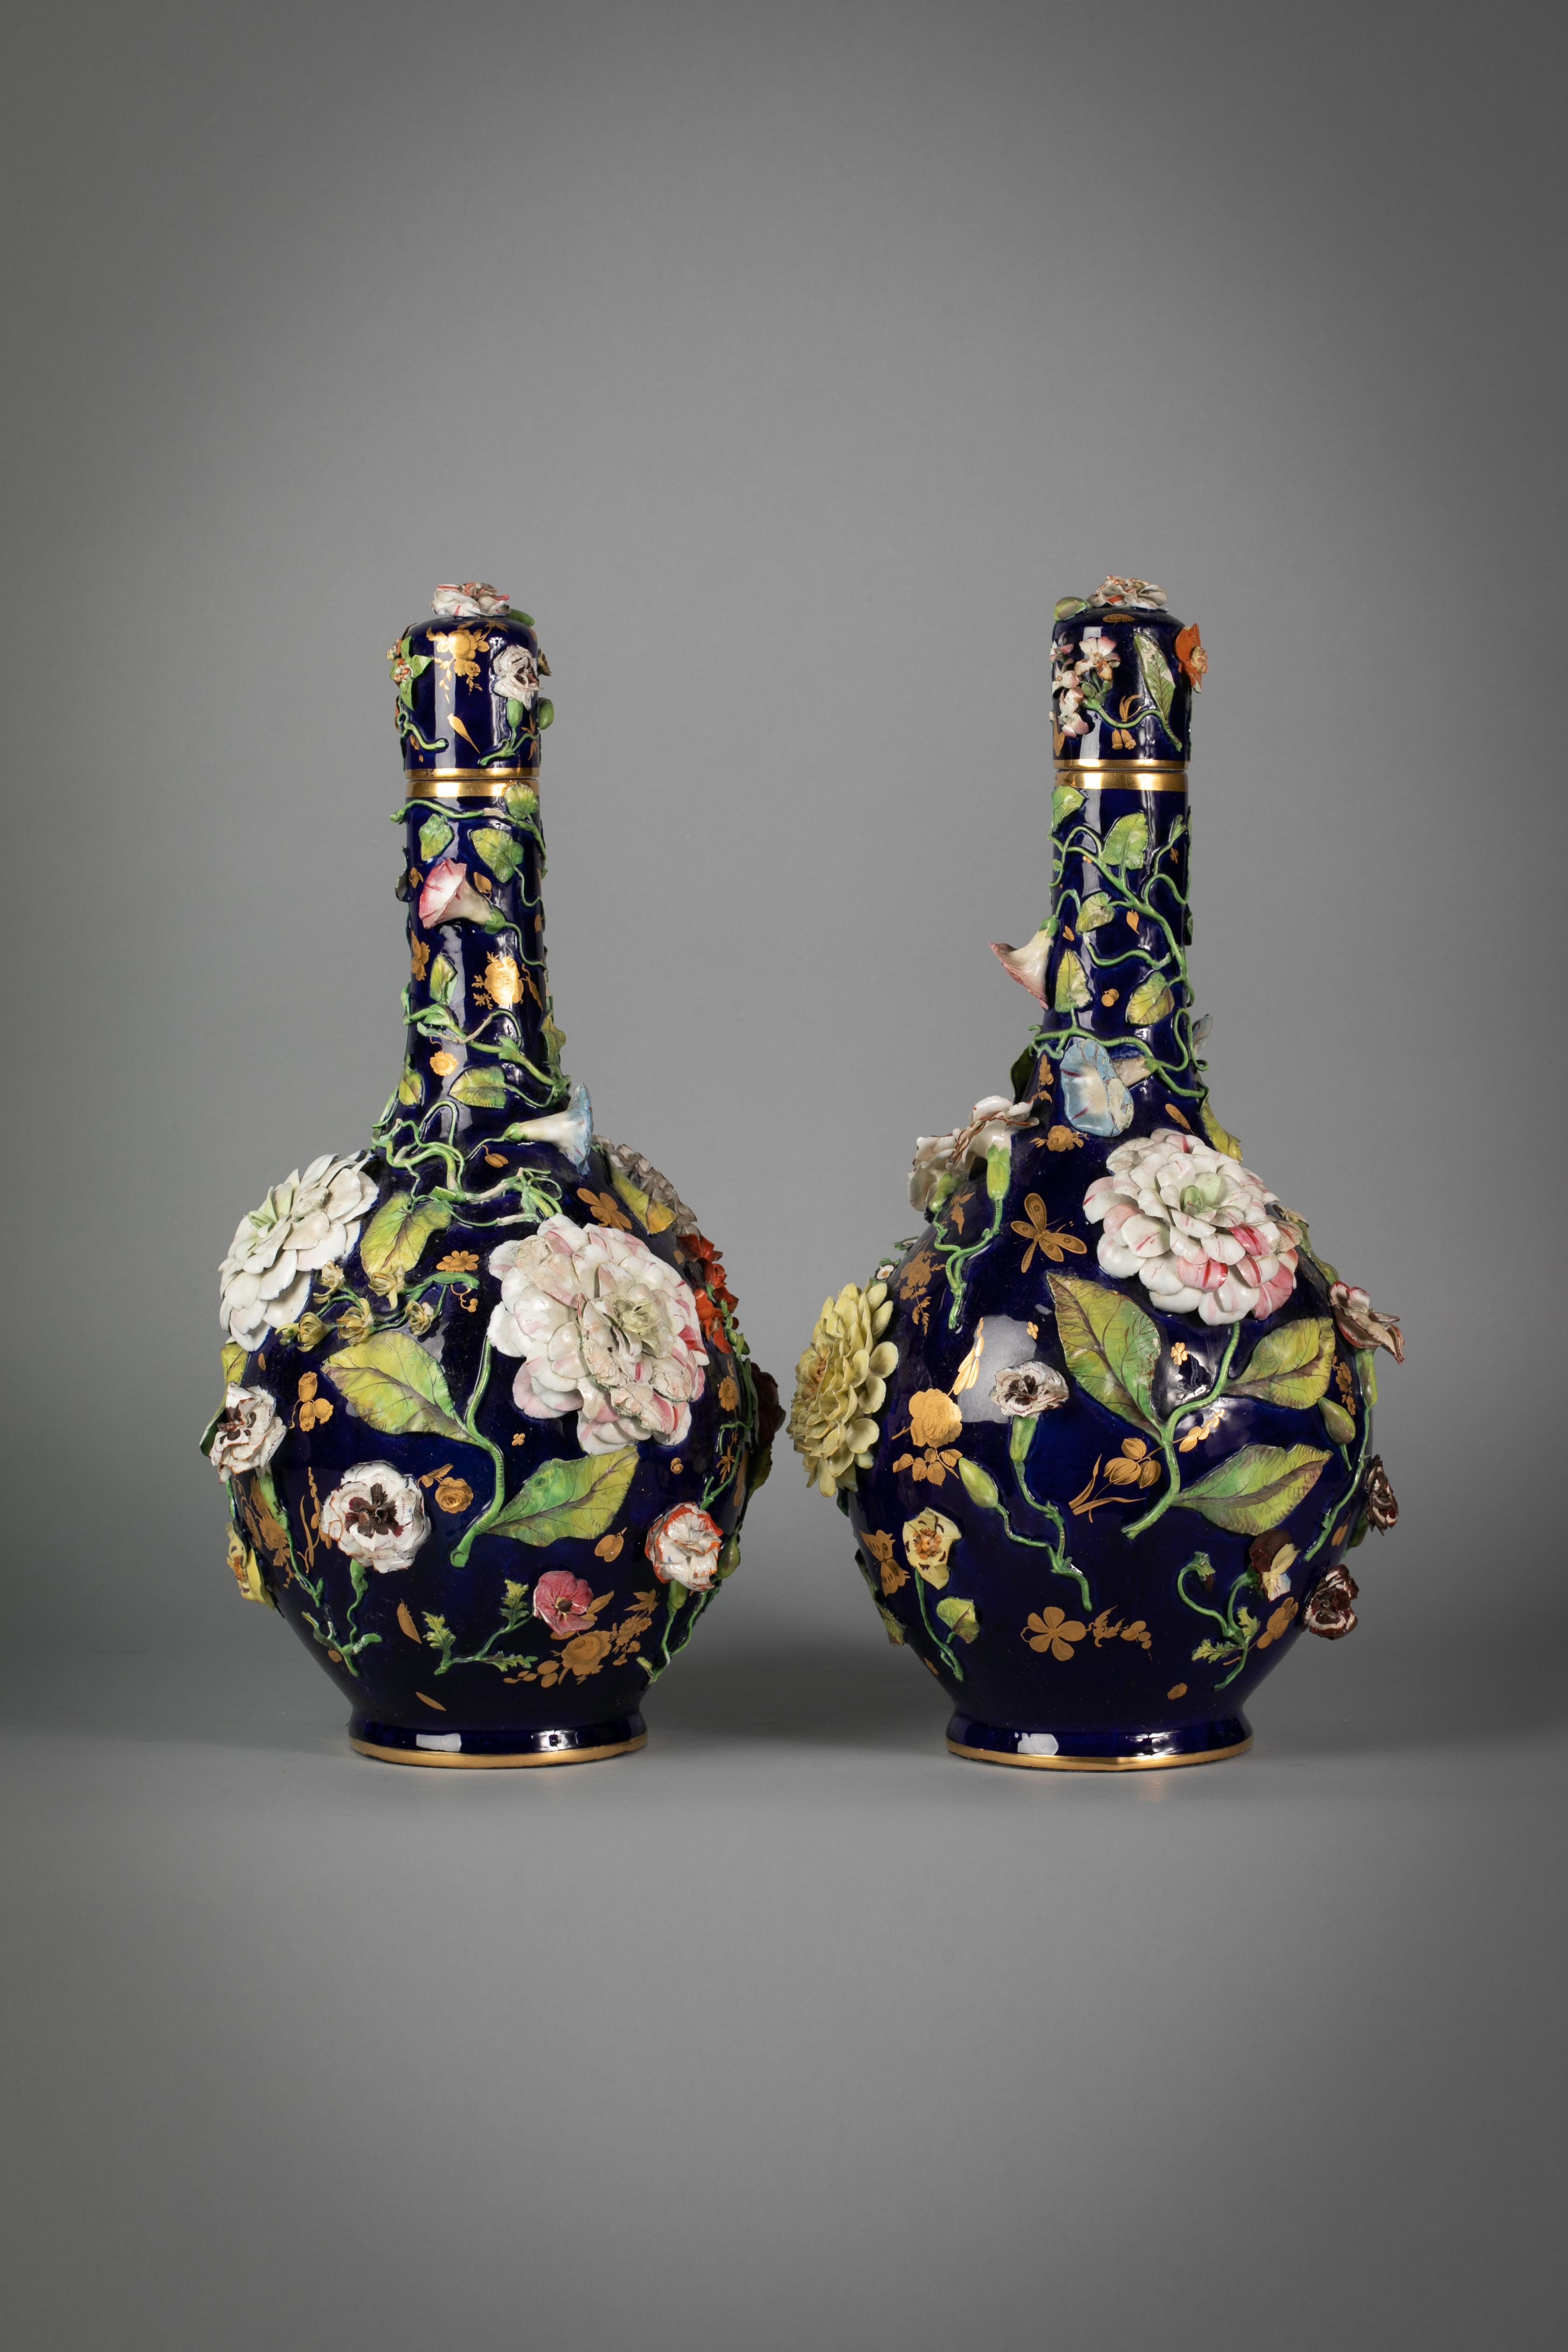 Pair of English porcelain floral covered vases, circa 1840.